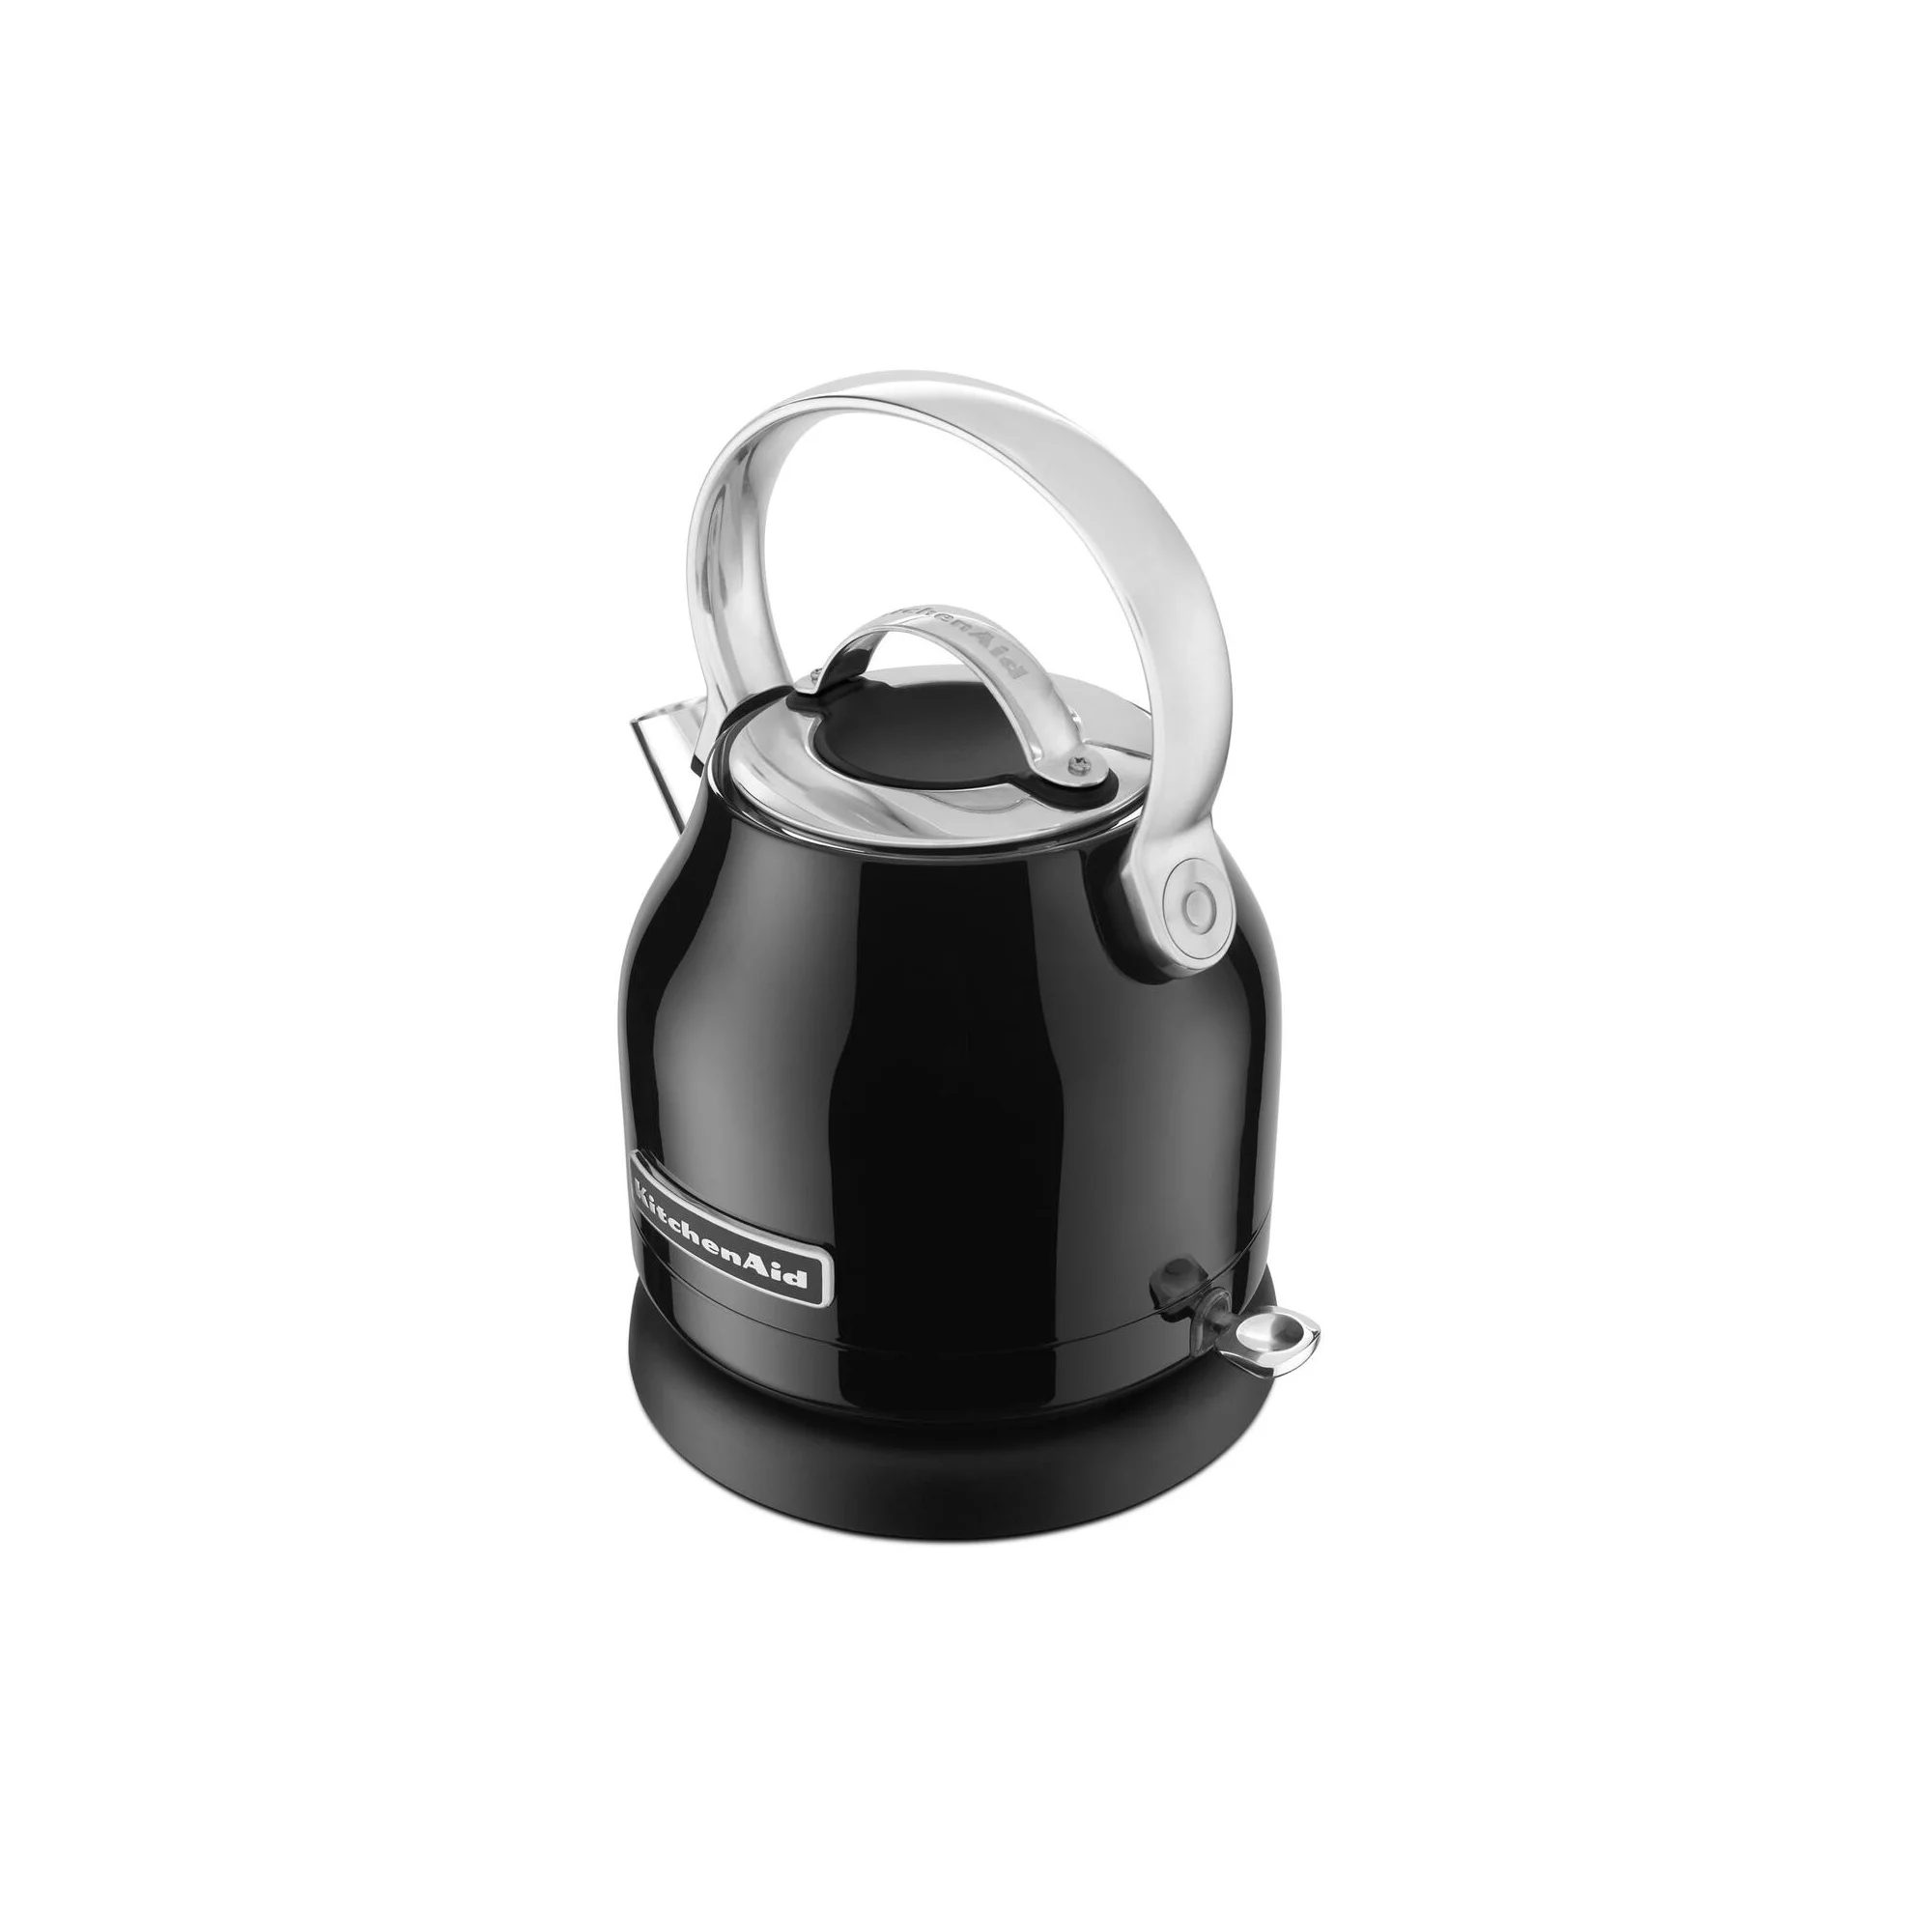 KitchenAid 1.25L Small Space Kettle in Black